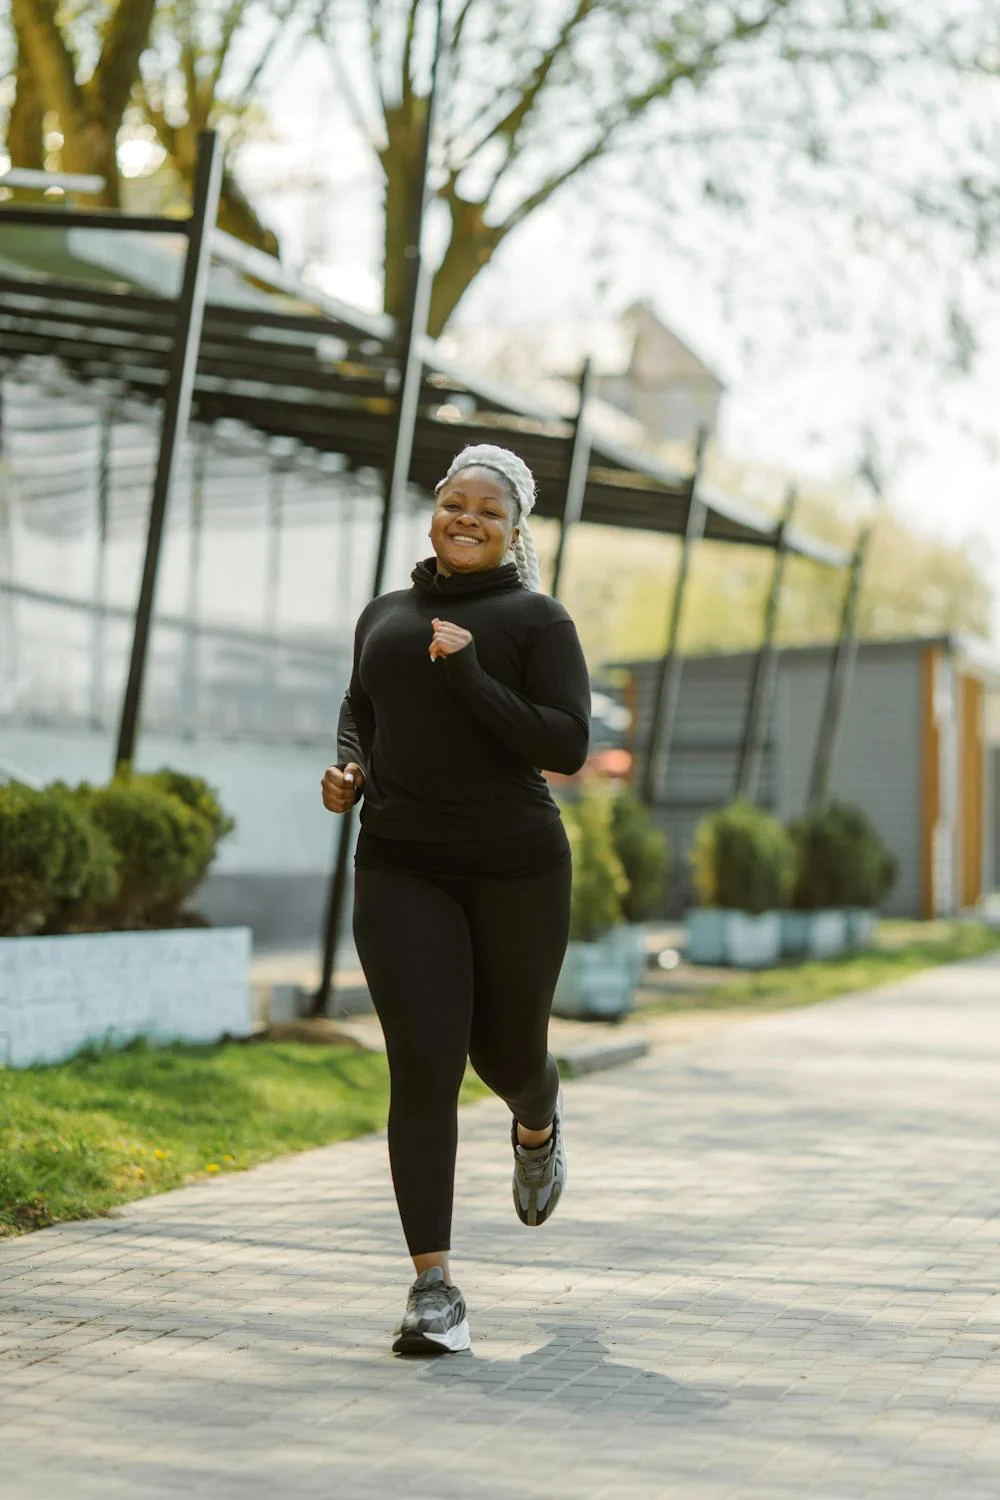 jogging to lose weight for beginners